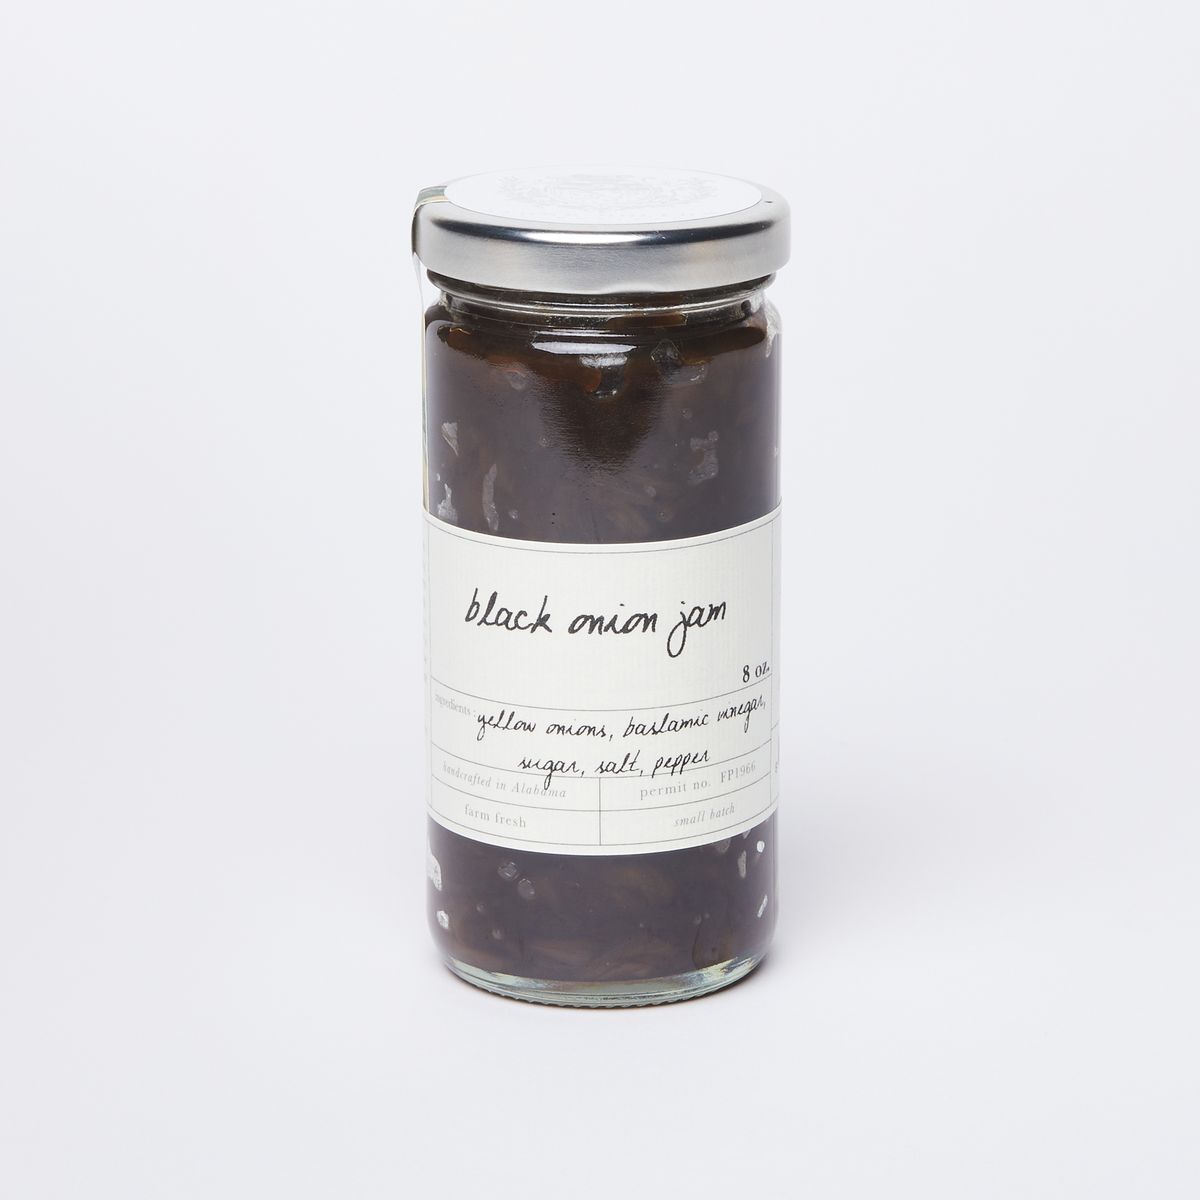 A clear glass jar full of onion jam with a silver lid and a white label that reads "Black Onion Jam"